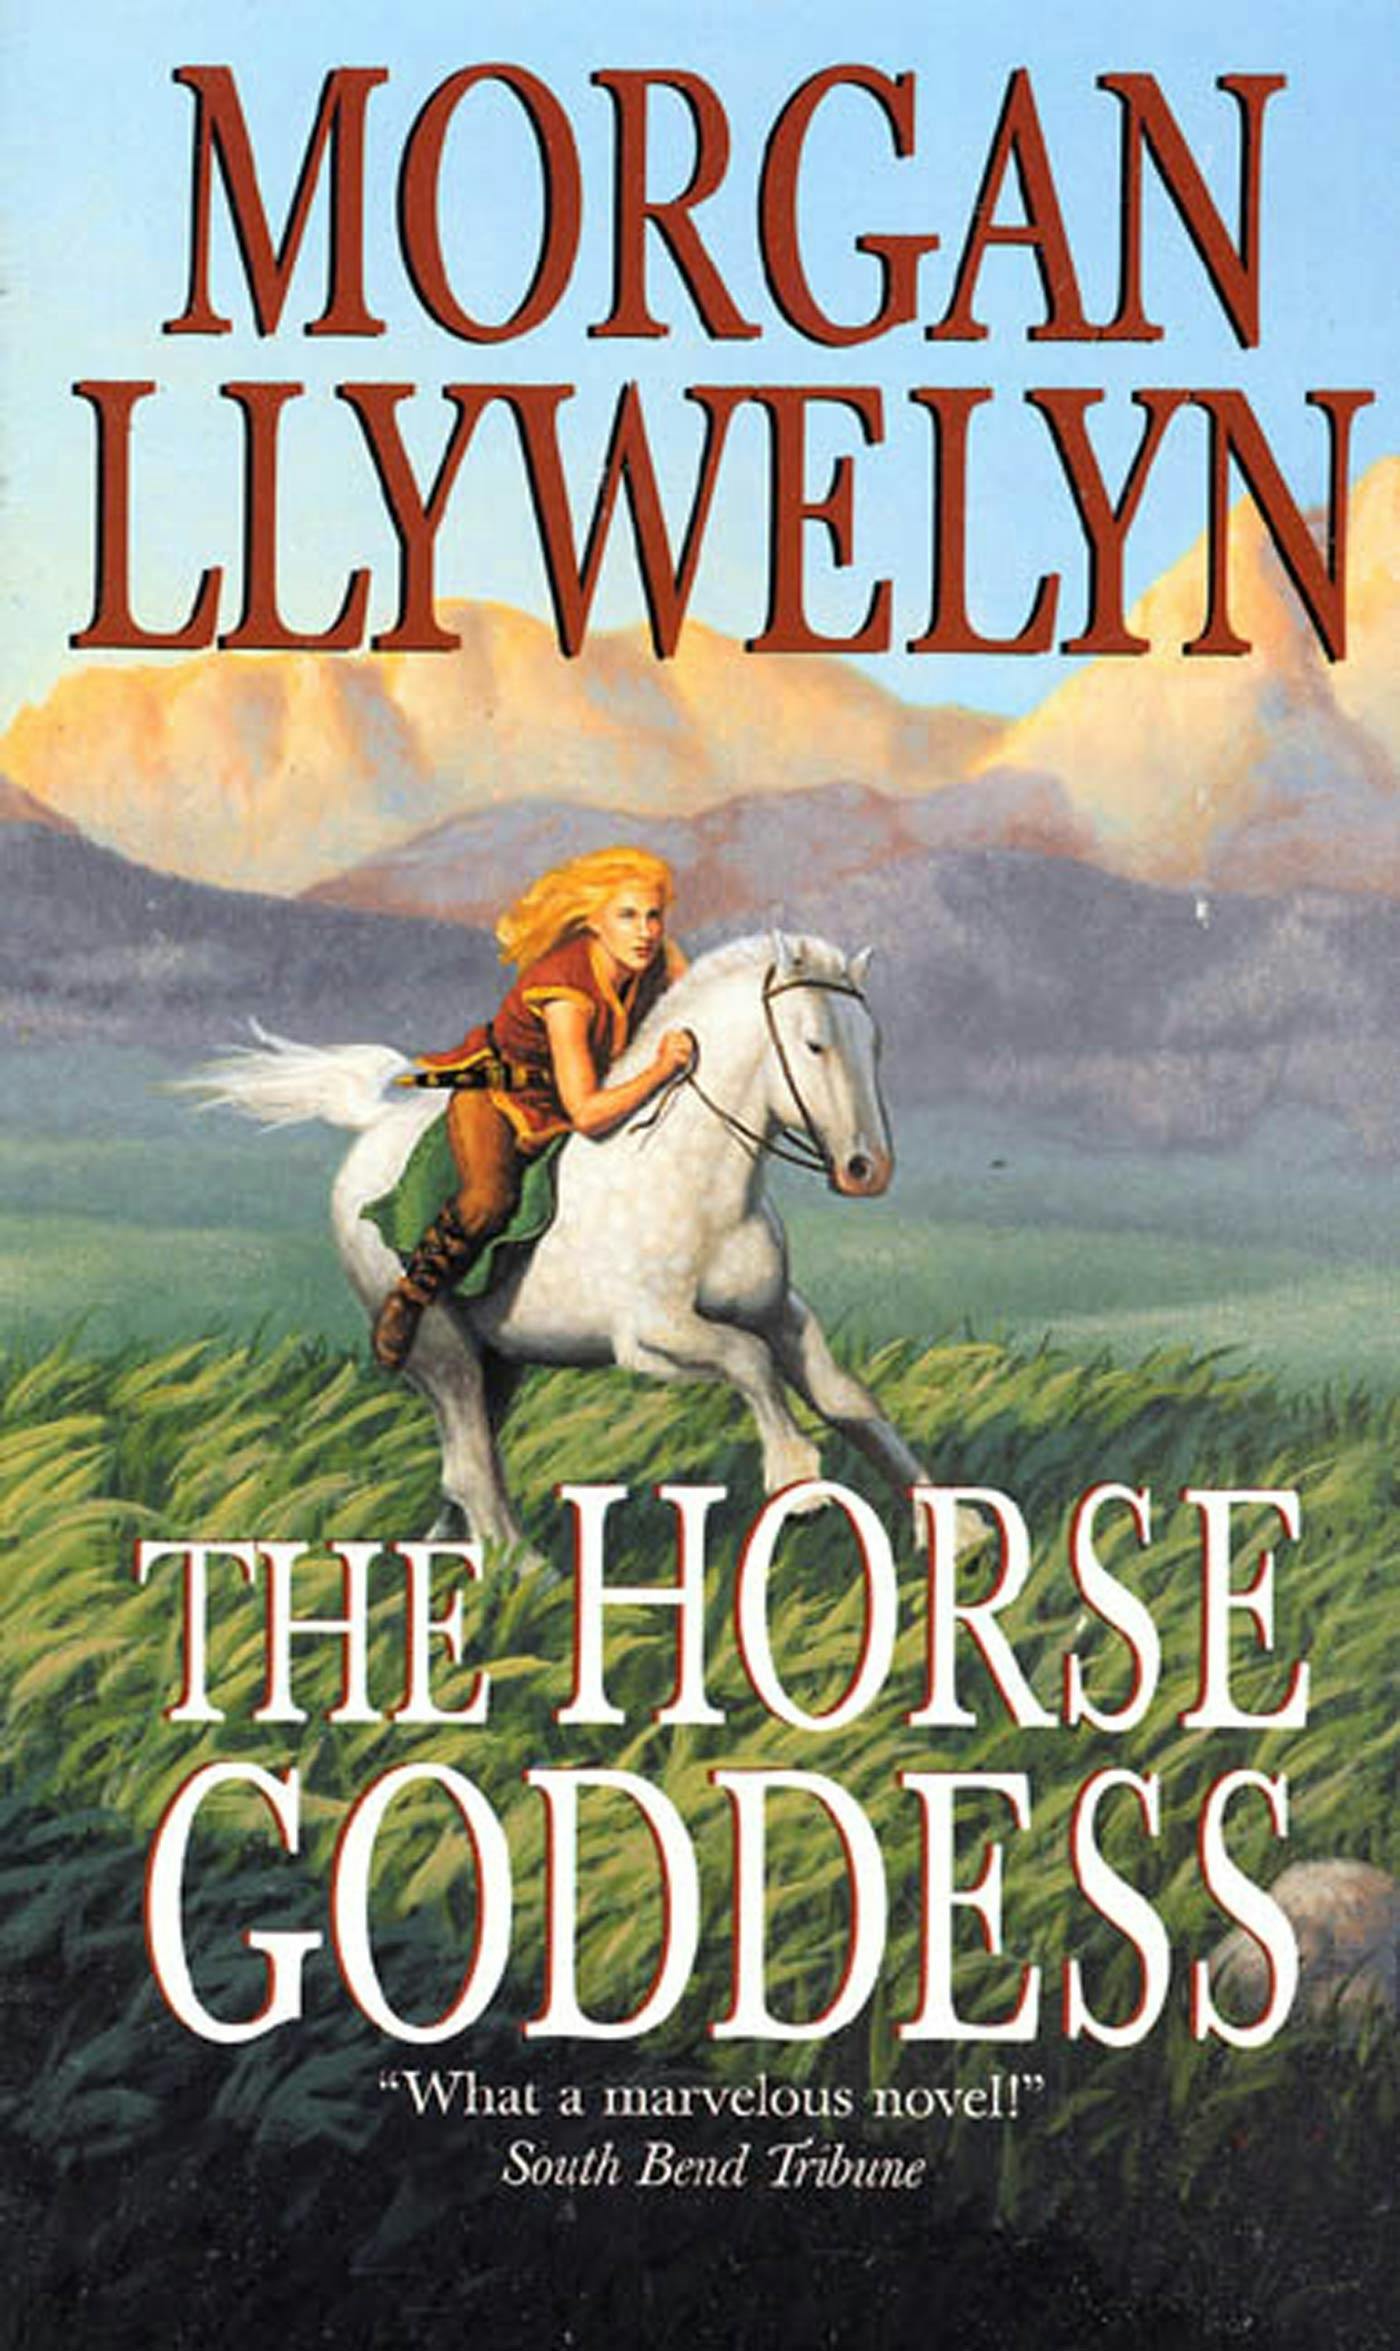 Cover for the book titled as: The Horse Goddess